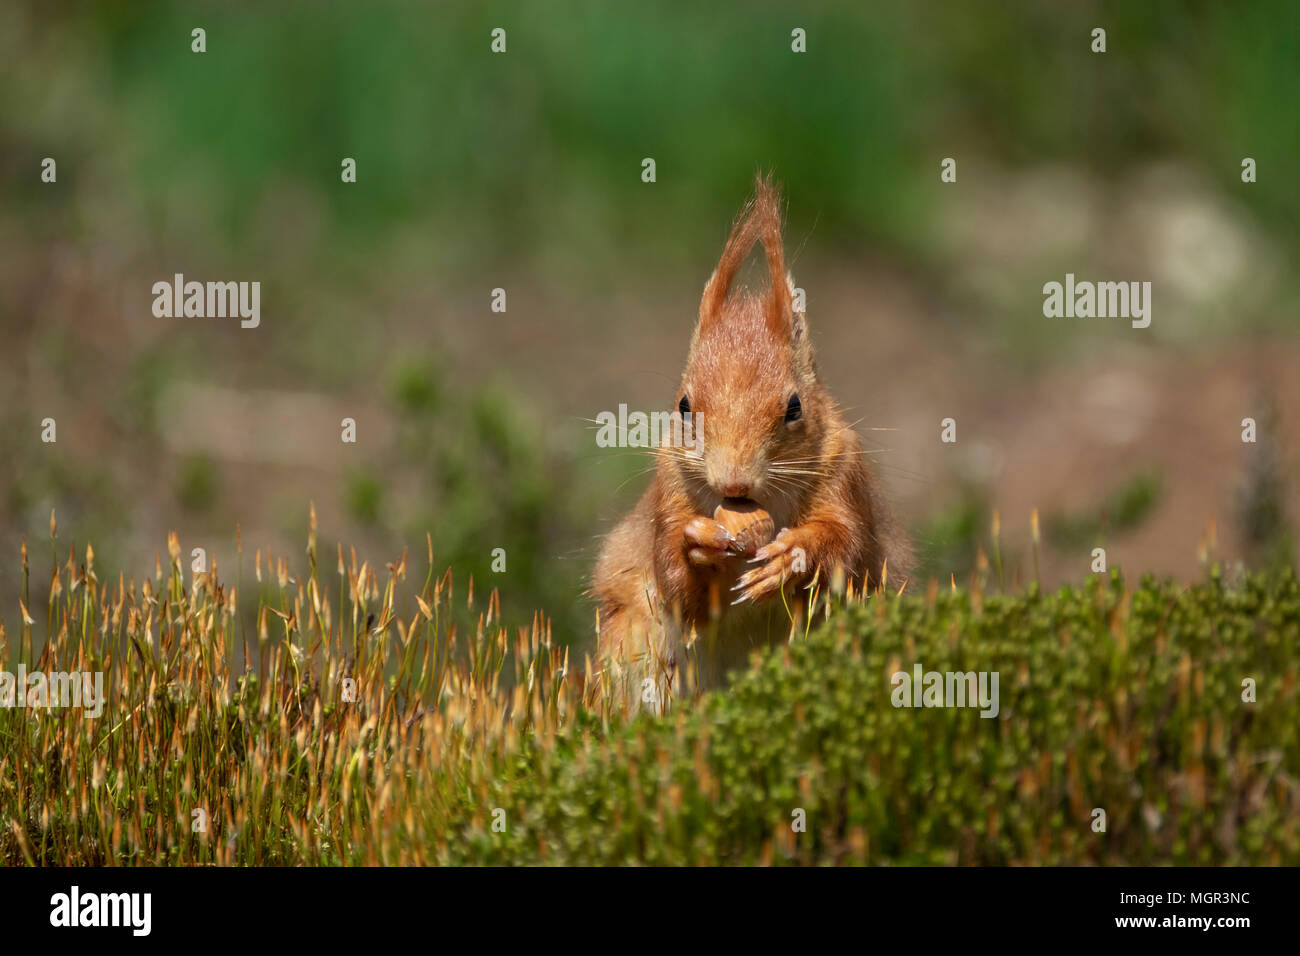 red squirrel nibbles a nut and sits peacefully in the grass Stock Photo